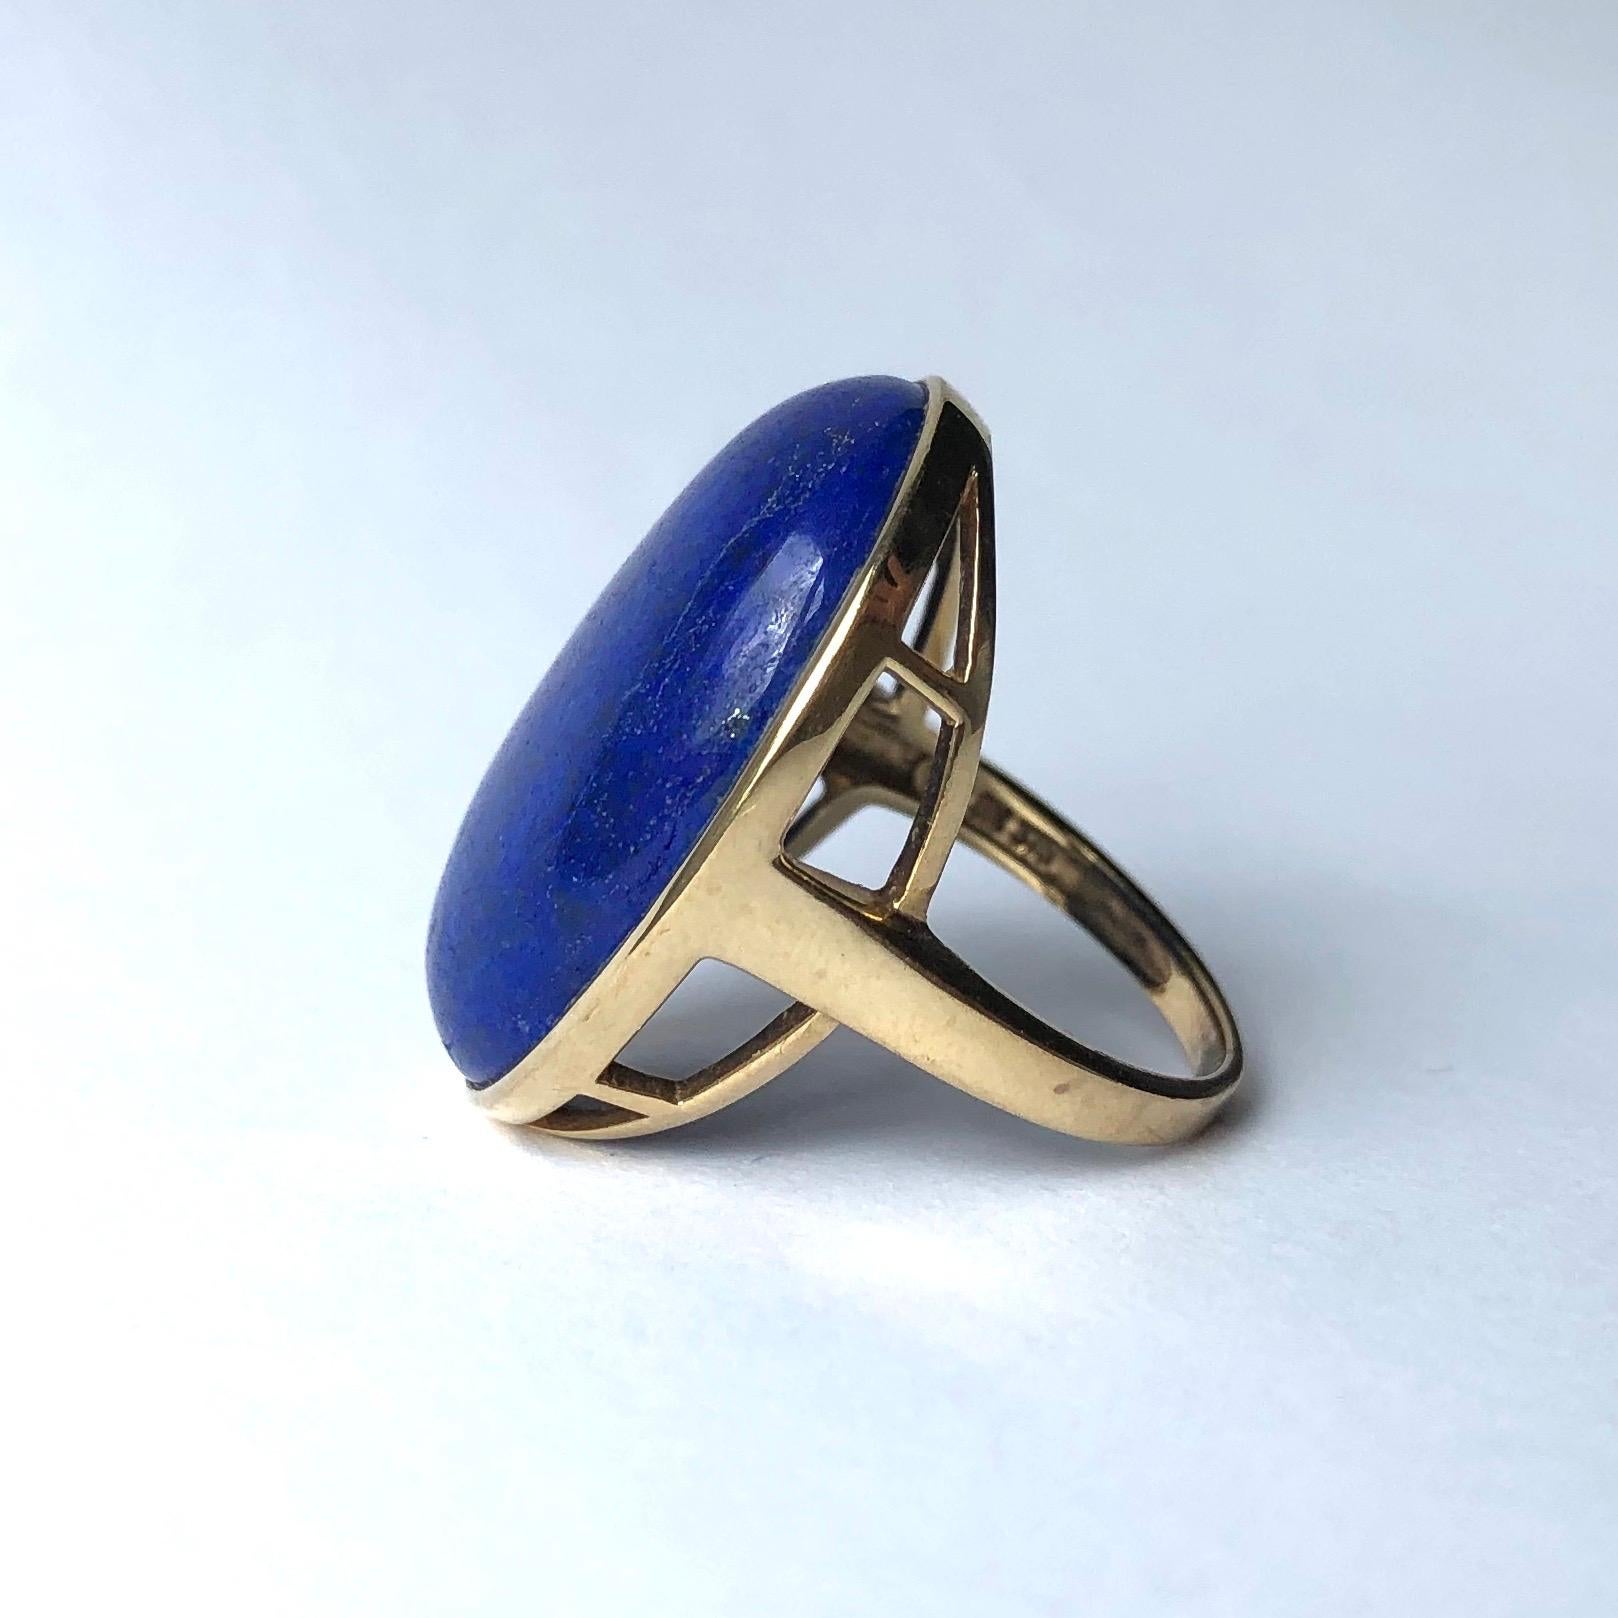 The large face of this ring is made up of a bright blue lapis stone set simply within a 9ct old frame. The ring features an open work gallery which leads to a very simple gold band. 

Ring Size: K or 5 1/4 
Stone Dimensions: 28x24mm
Height From